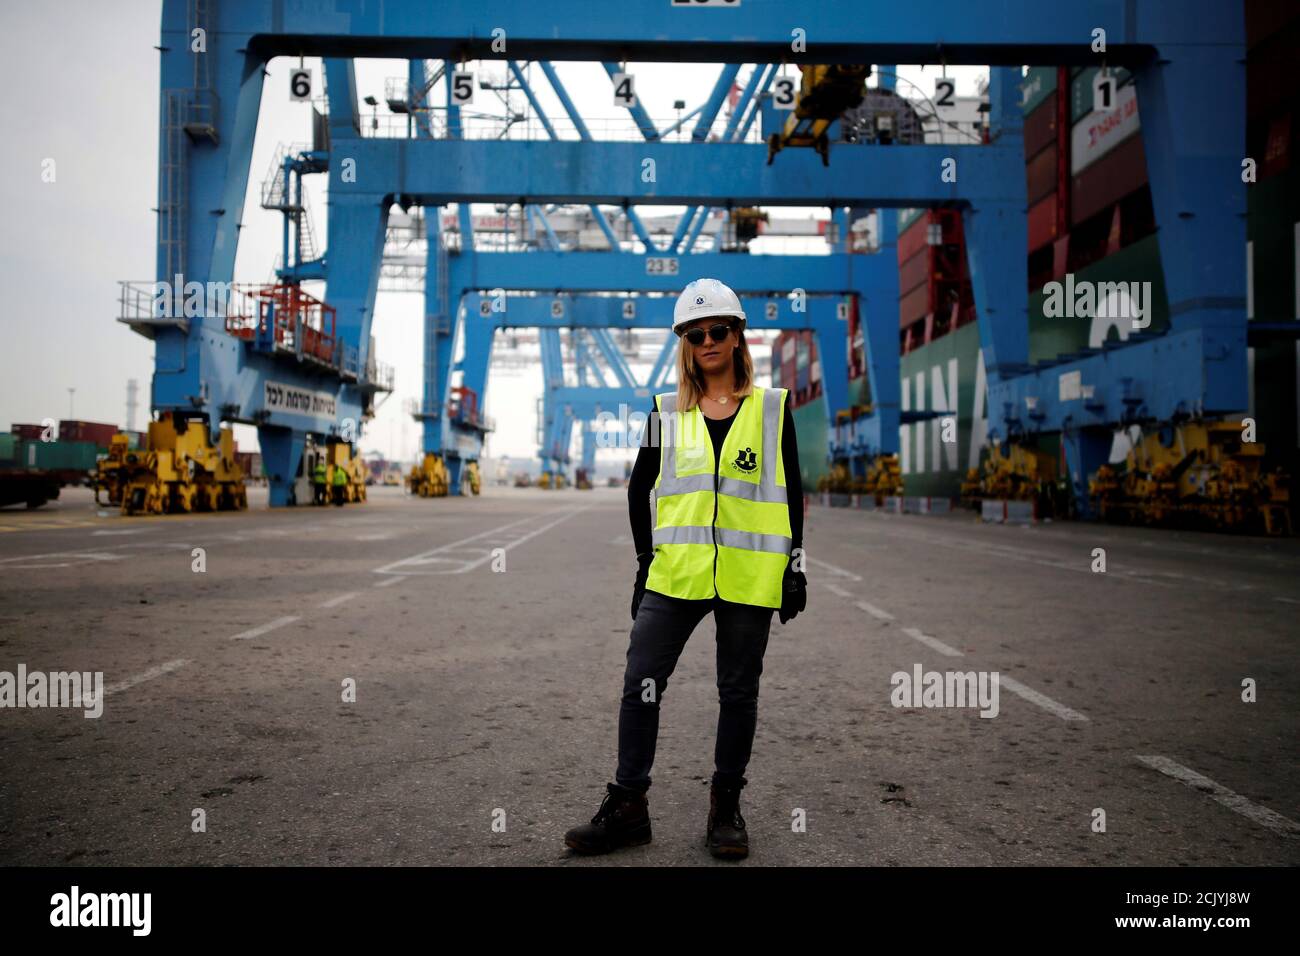 Liz Azoulay, 26, who loads and unloads cargo at Ashdod port, poses for a photograph at the port, in Ashdod, southern Israel, February 22, 2017. 'In most of my professional life I did not face any inequality. In the port of Ashdod we are equal on the docks. I am the first woman who began working at the Ashdod port as a stevedore.' REUTERS/Amir Cohen SEARCH 'WOMEN WORK' FOR THIS STORY. SEARCH 'WIDER IMAGE' FOR ALL STORIES. Stock Photo